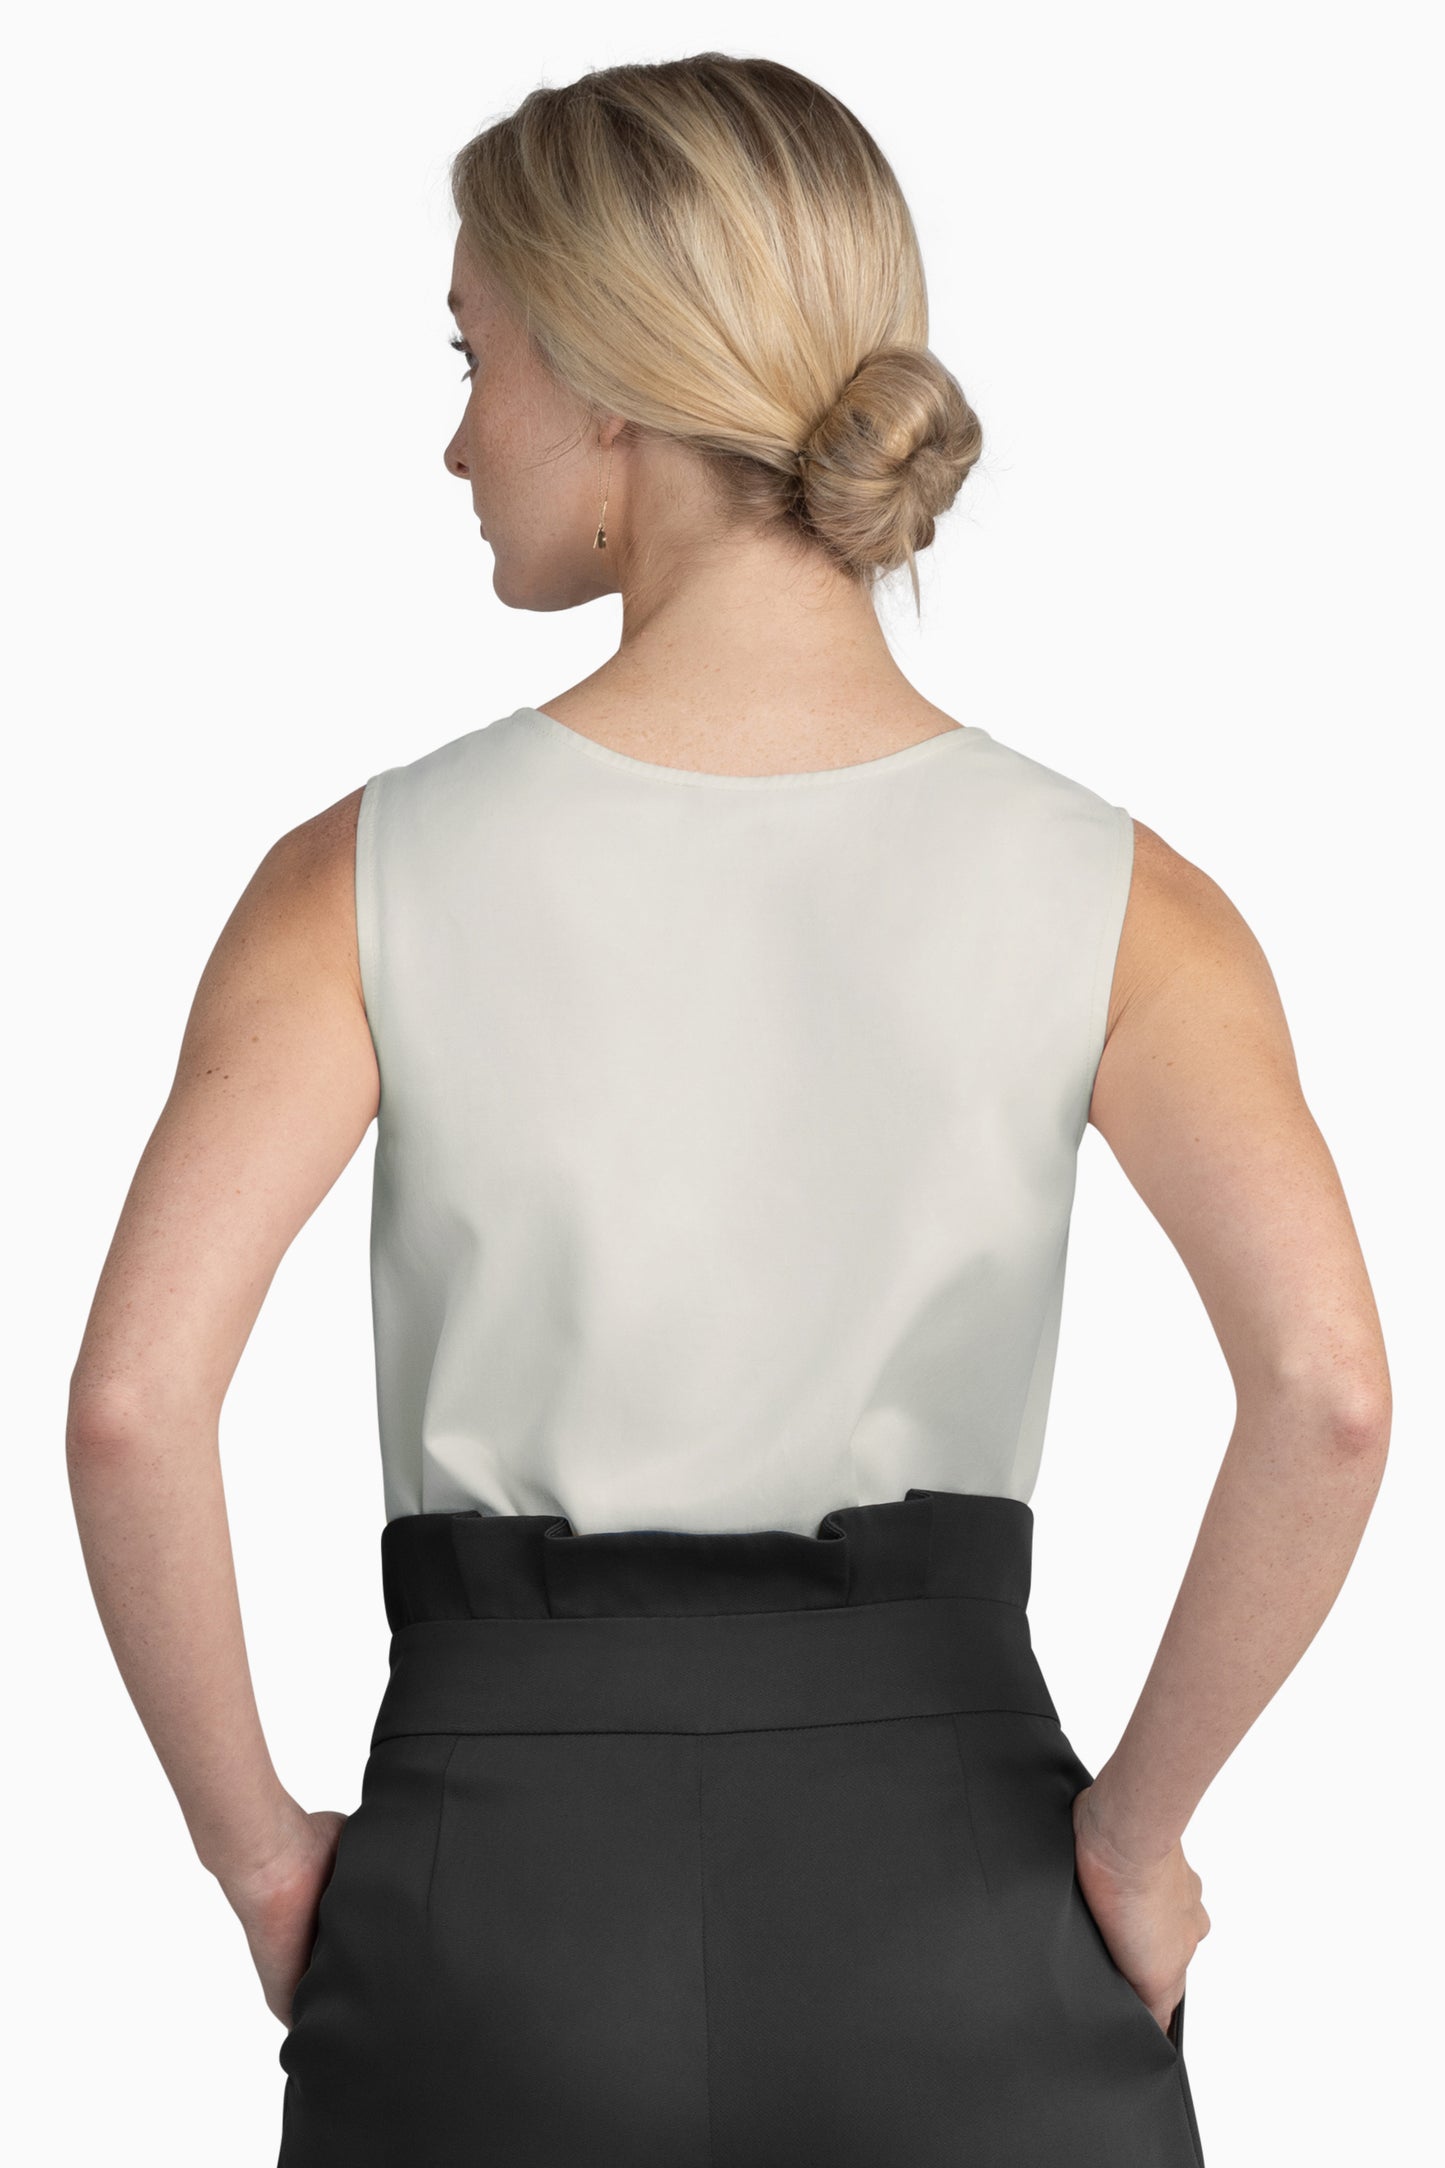 Women's sleeveless top with effortless drape and soft luxurious feel. Its unique Cupro-Cotton composition ensures perfect for all-day wear.